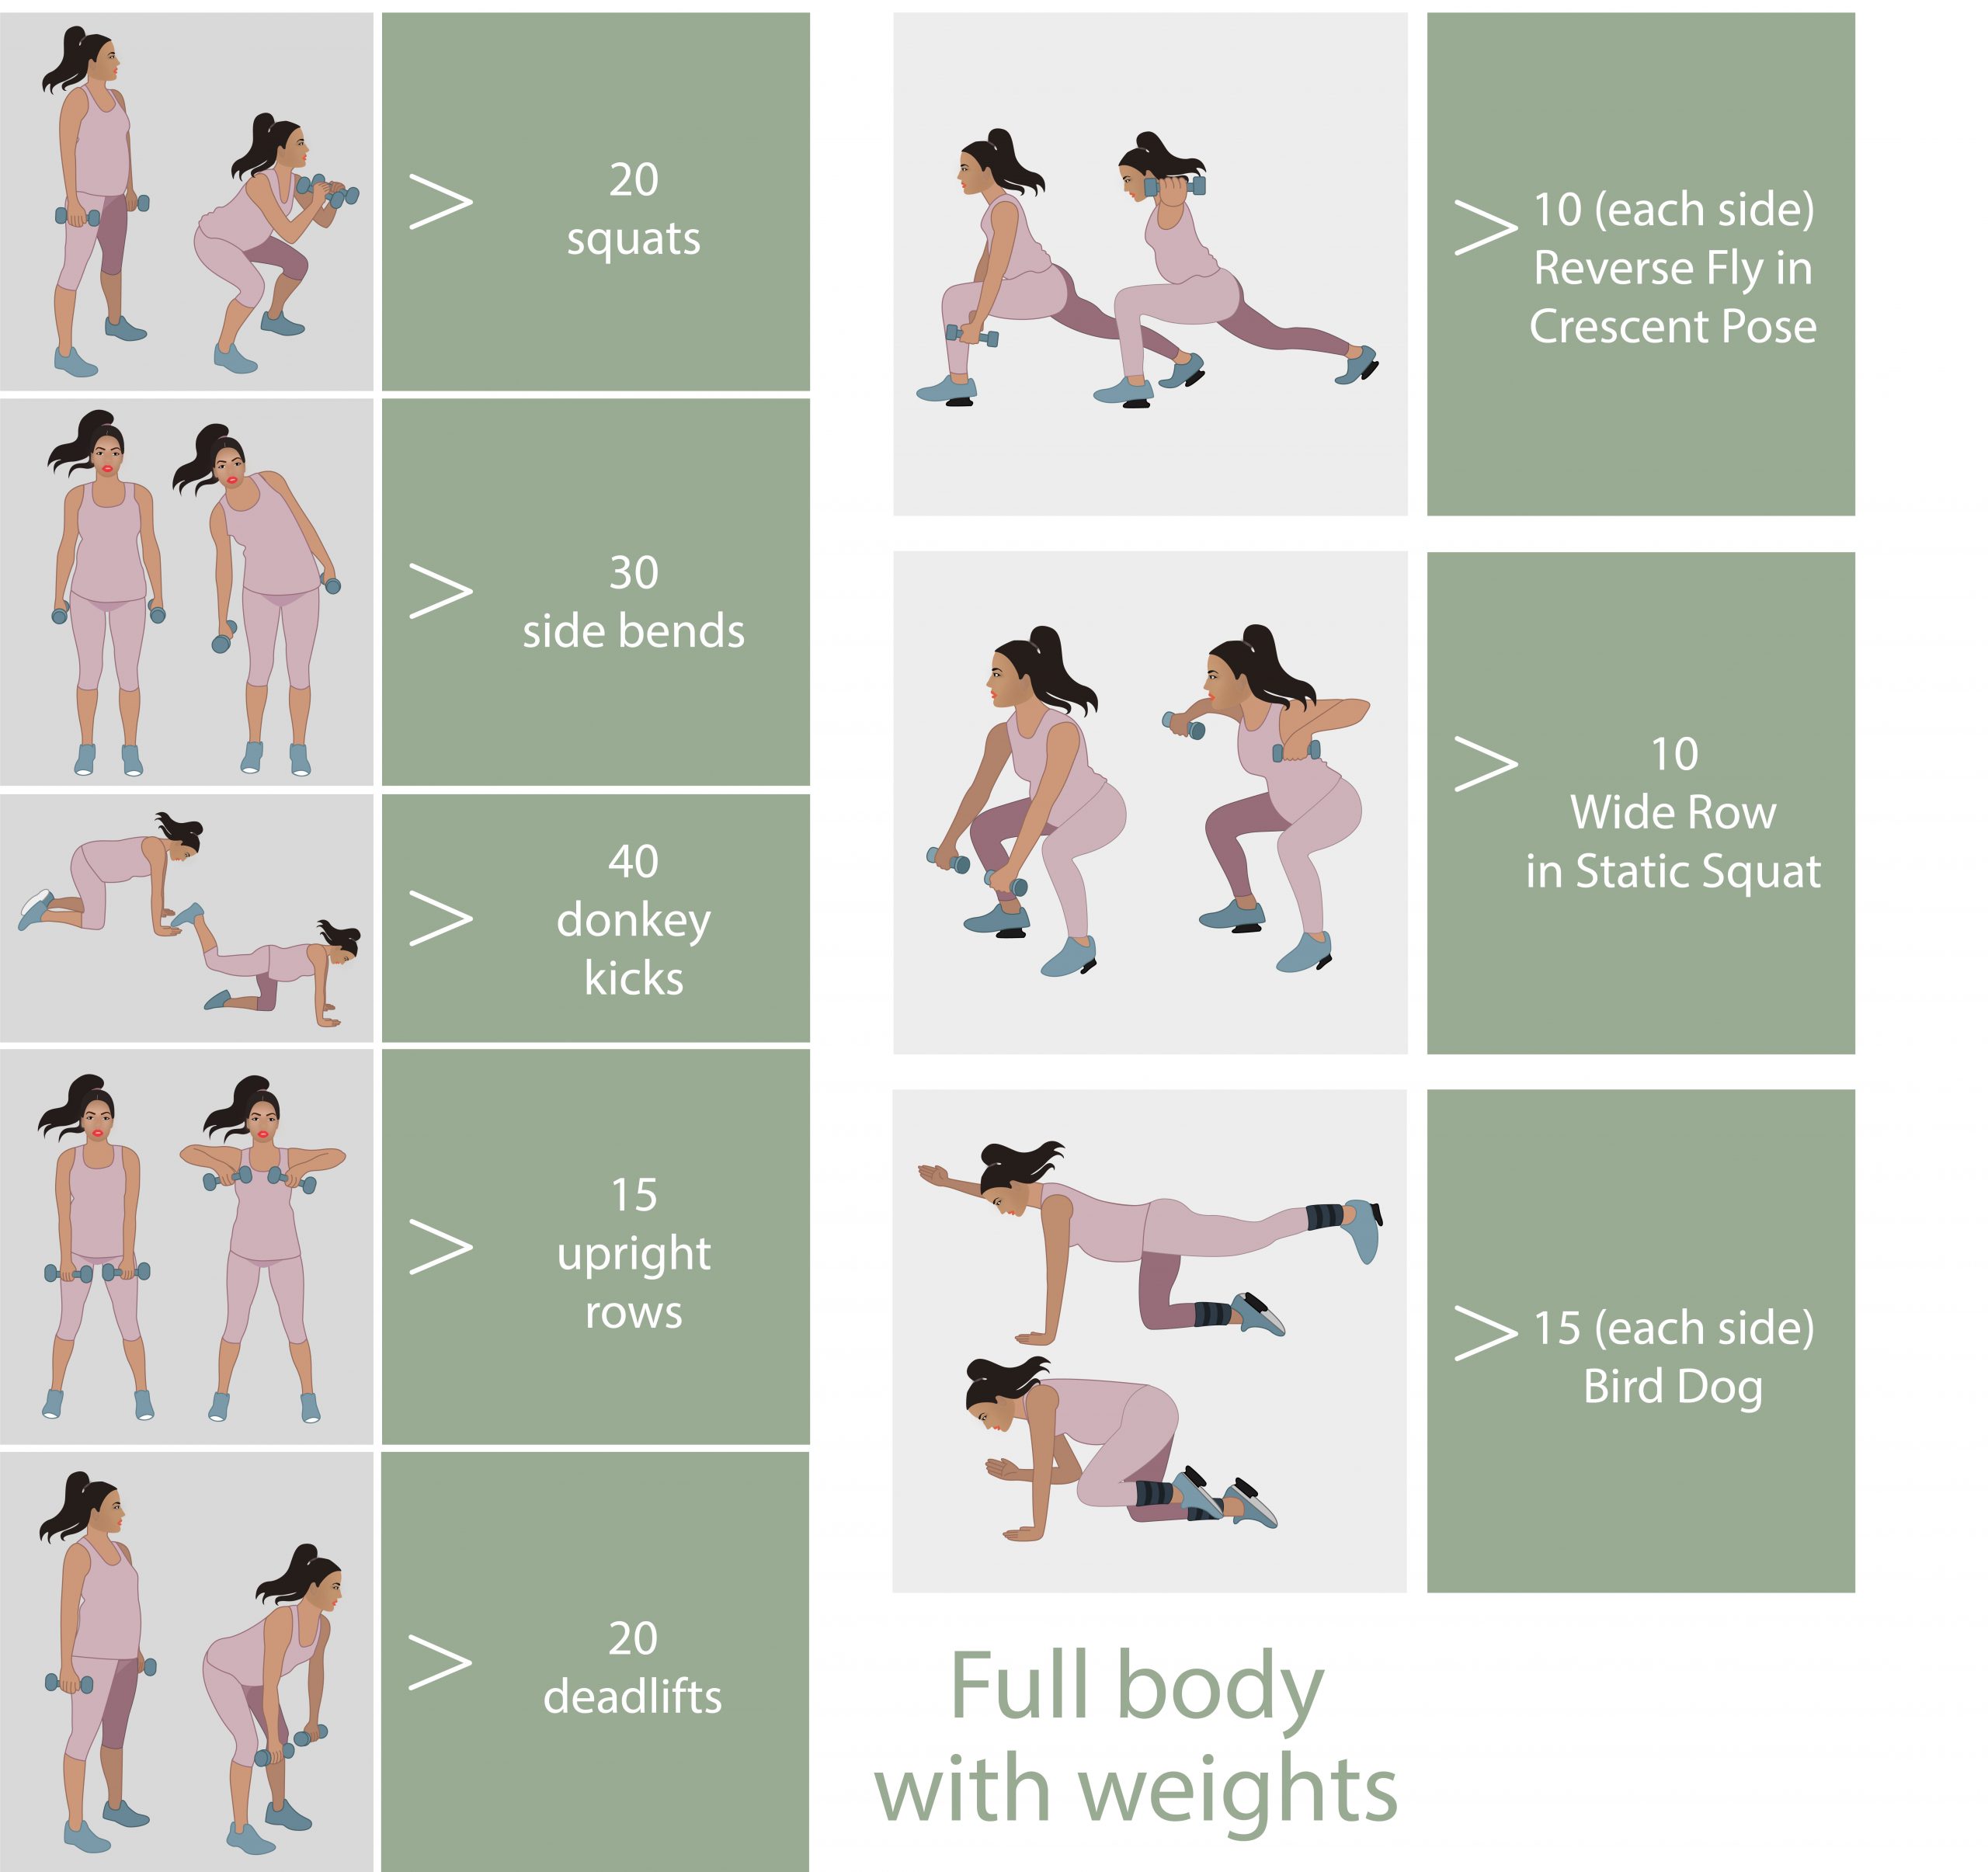 pregnancy exercise Page 01 Final File